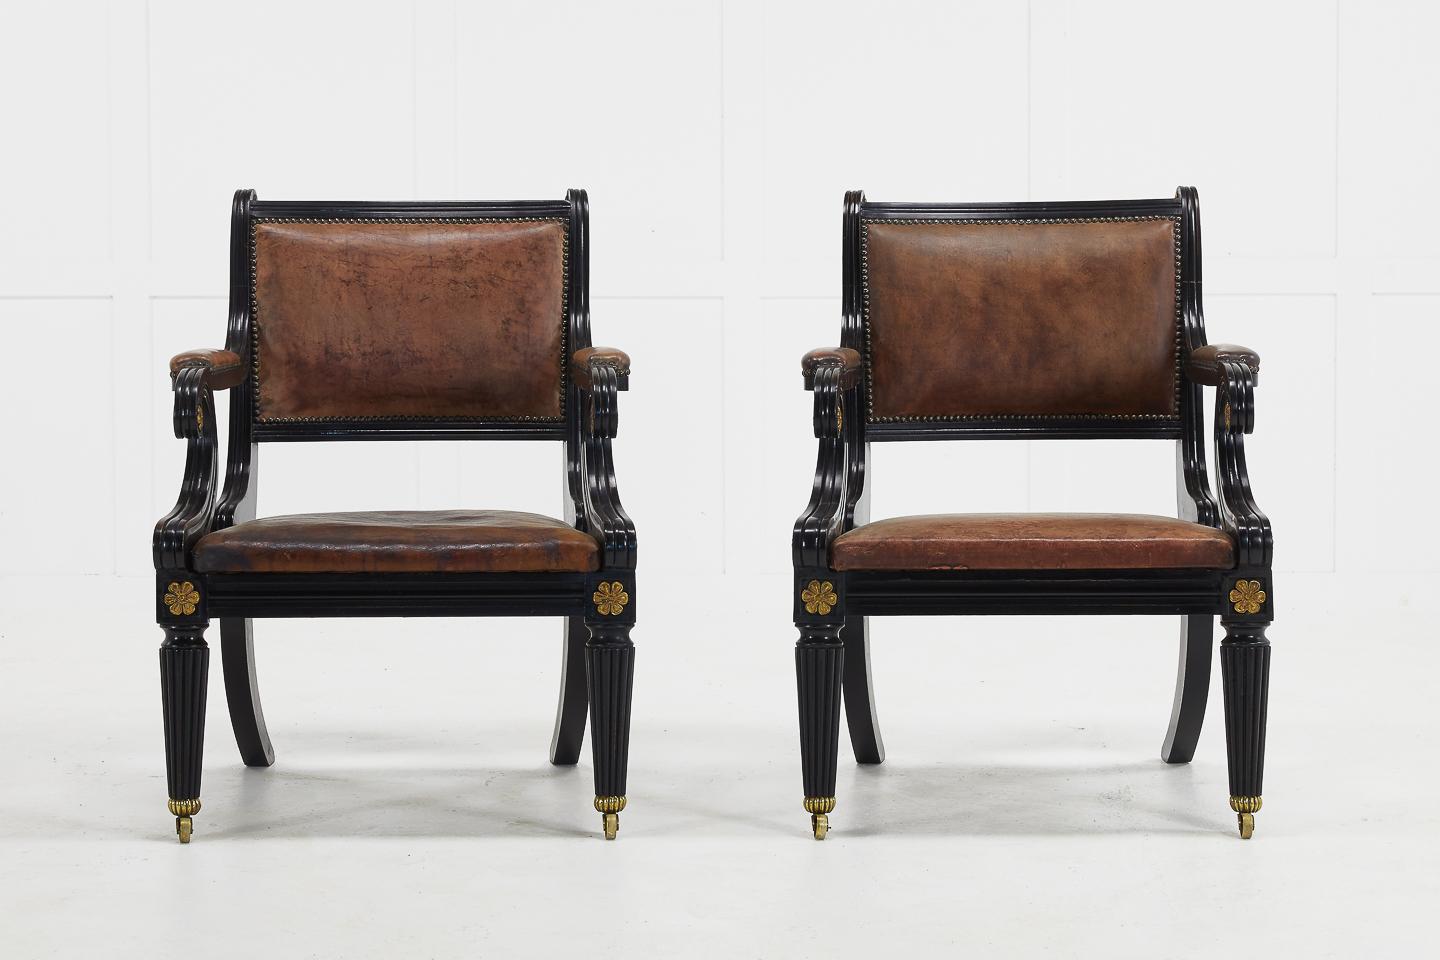 Pair of shapely, late 20th century English Regency style ebonized armchairs with gilt metal decoration. Upholstered in tan leather.